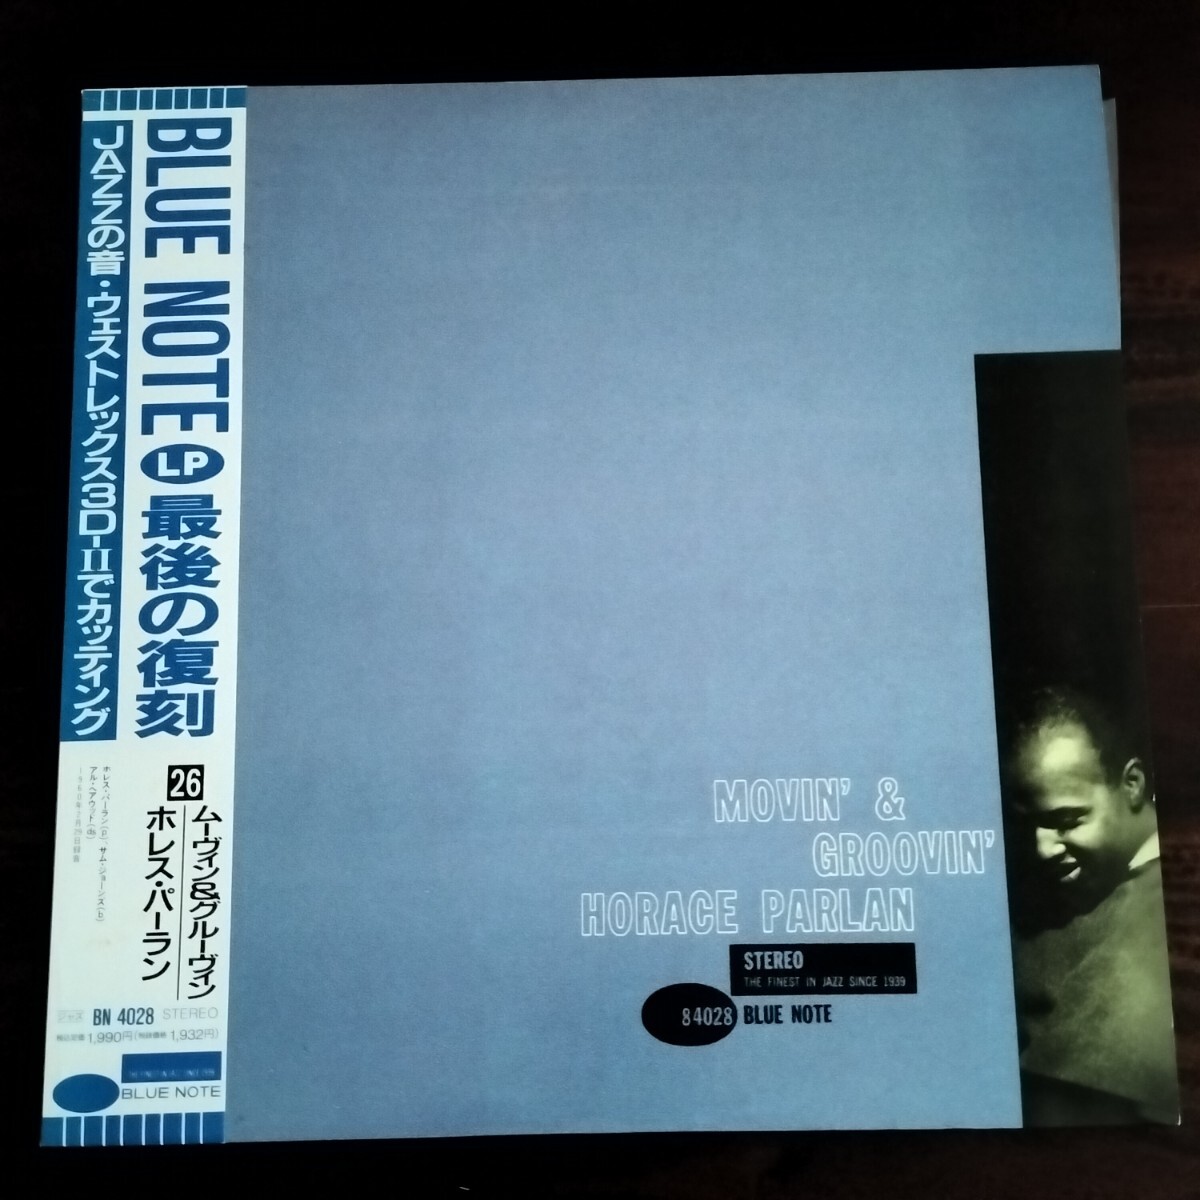 【BN-4028/BST-84028】MOVIN' & GROOVIN' / HORACE PARLAN / BLUE NOTE LP 最後の復刻 / 国内盤 / 帯付き_画像1